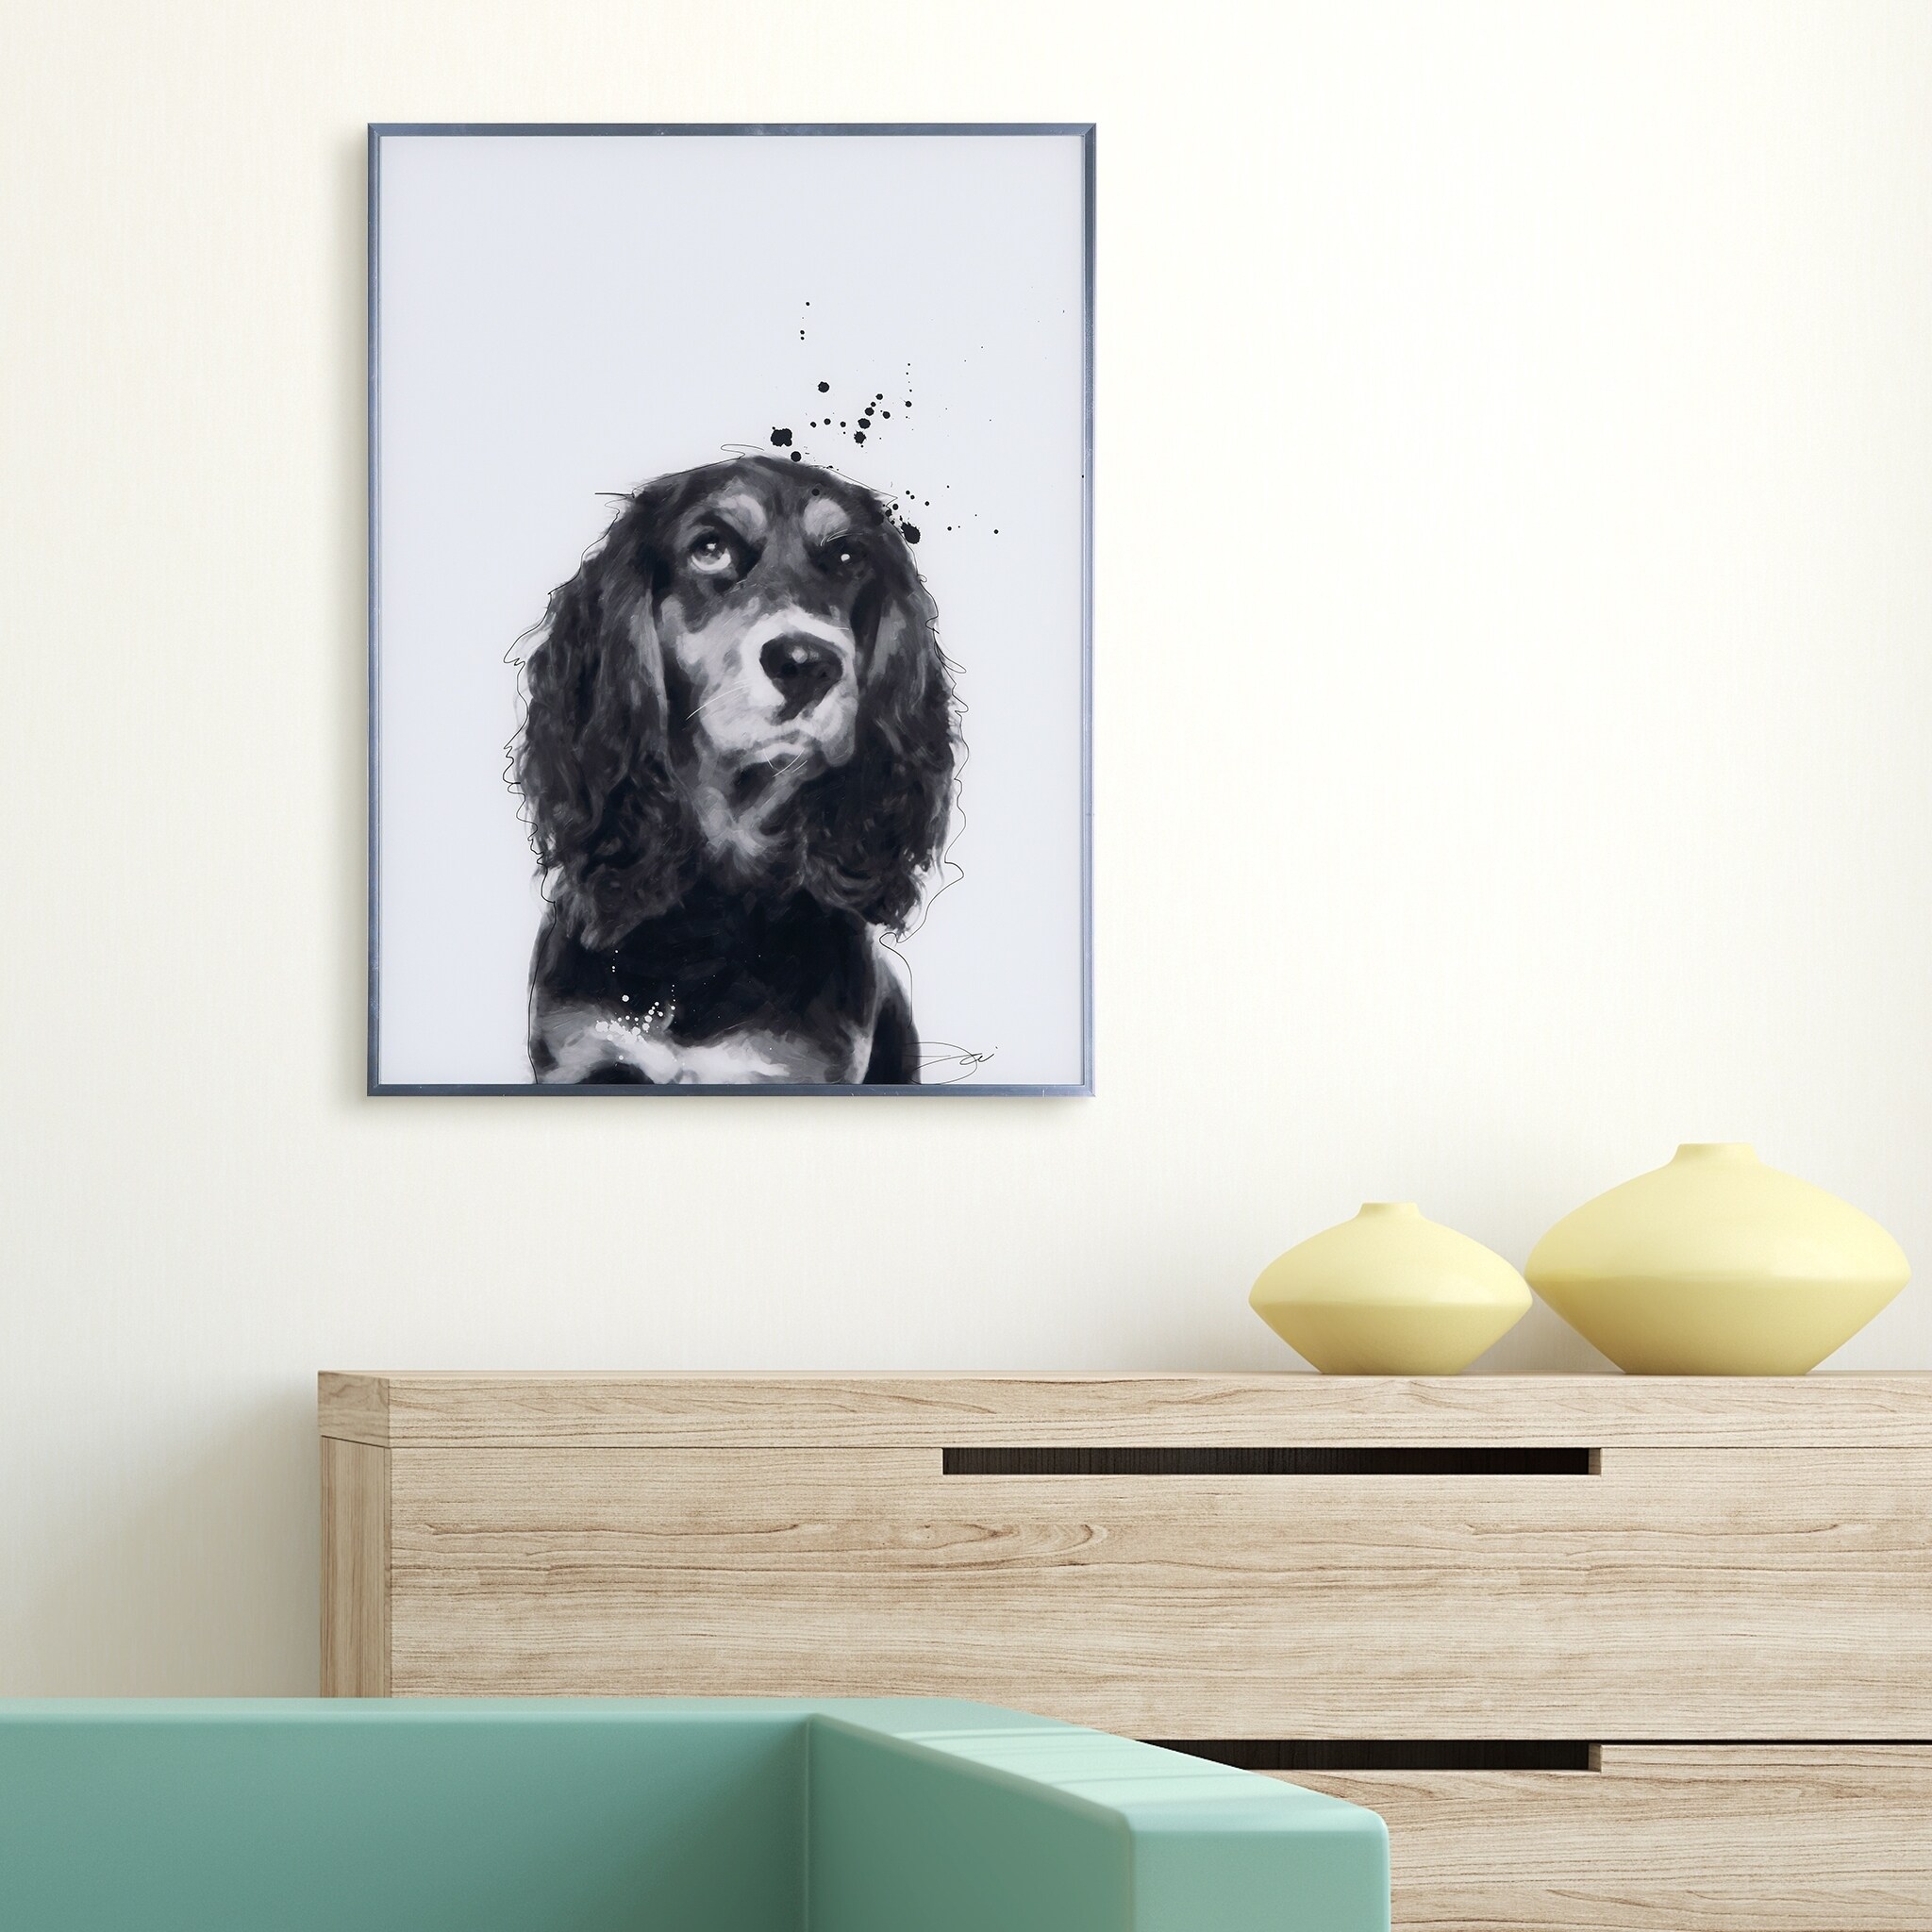 Shop Cocker Spaniel Black And White Pet Dog Wall Art Reverse Printed Glass Encased With A Gunmetal Anodized Frame On Sale Overstock 28571359